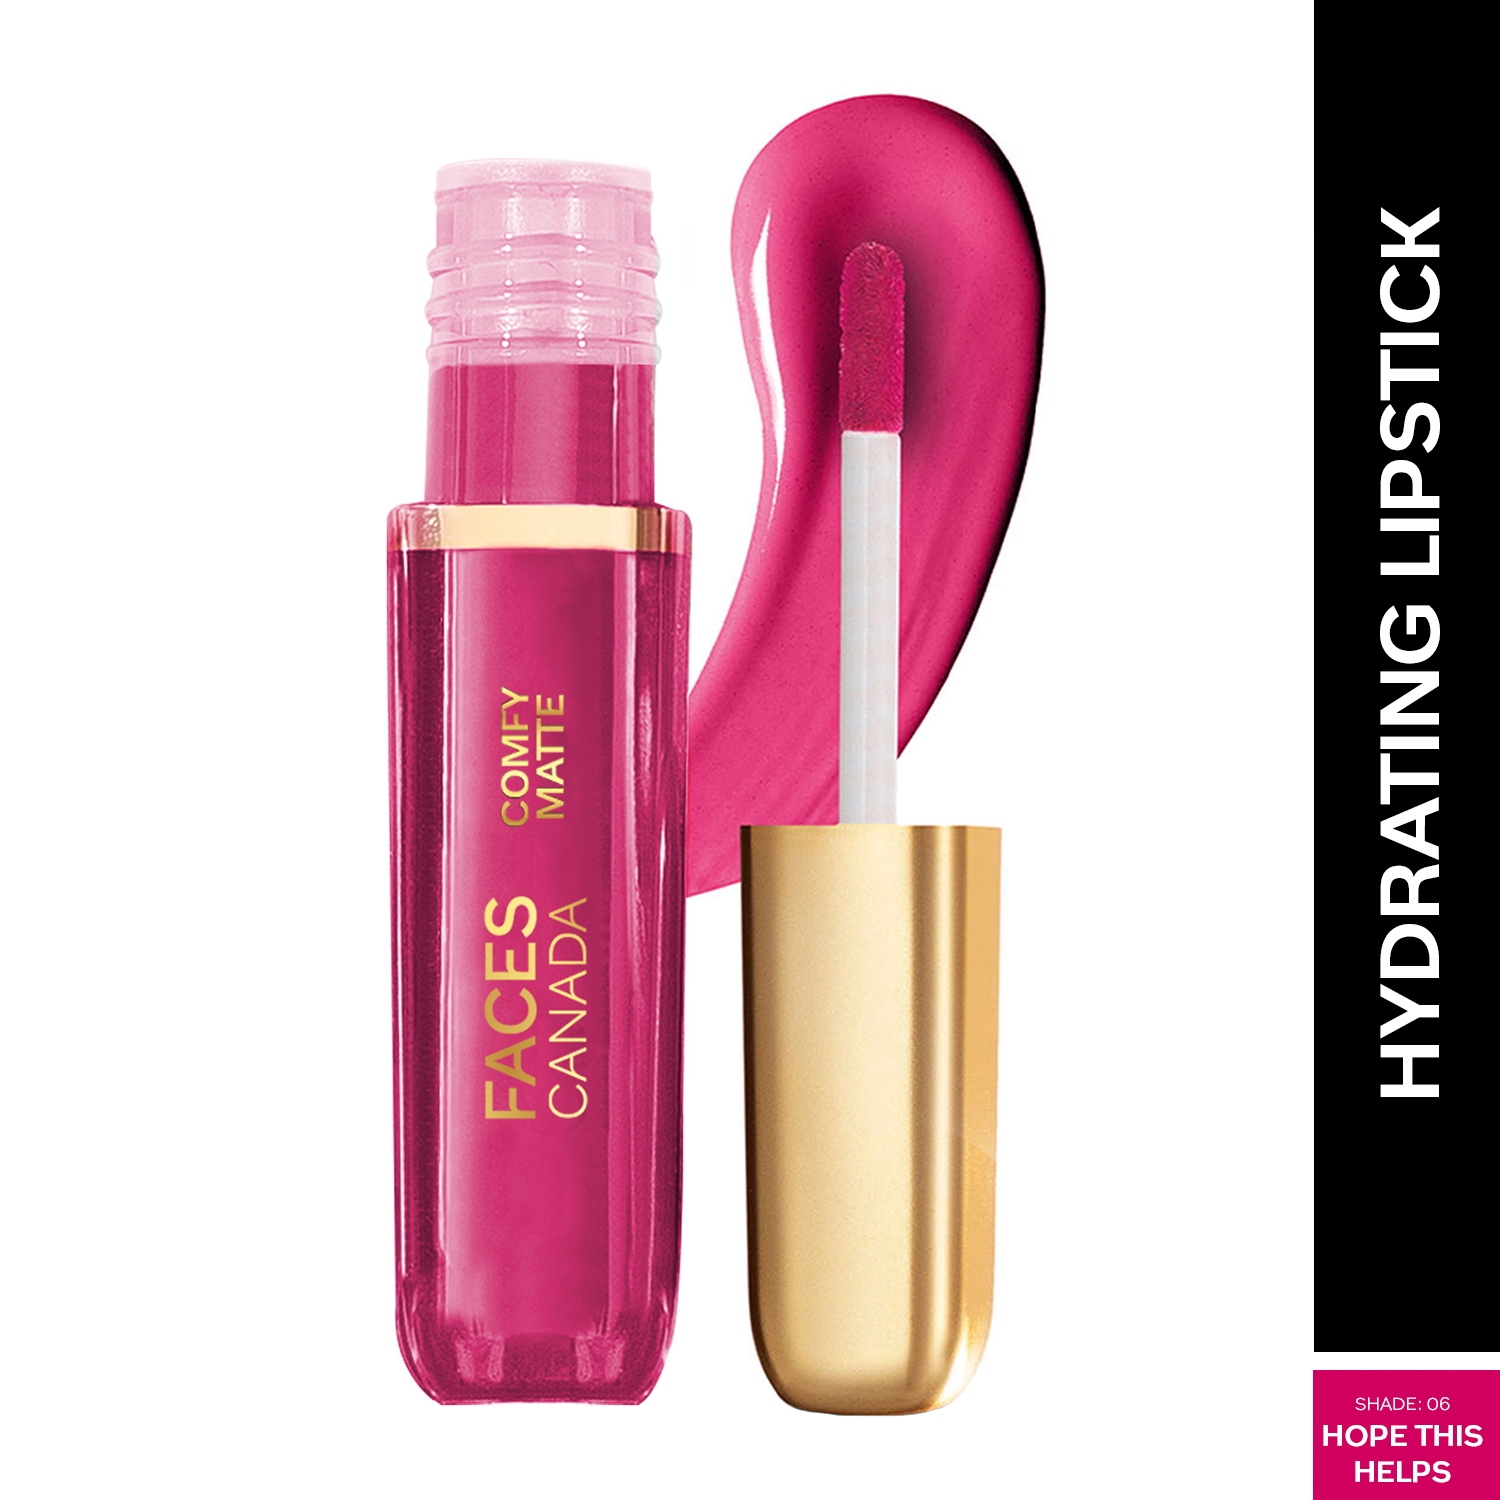 Faces Canada | Faces Canada Comfy Matte Liquid Lipstick 10HR Stay No Dryness - Hope This Helps 06 (3ml)